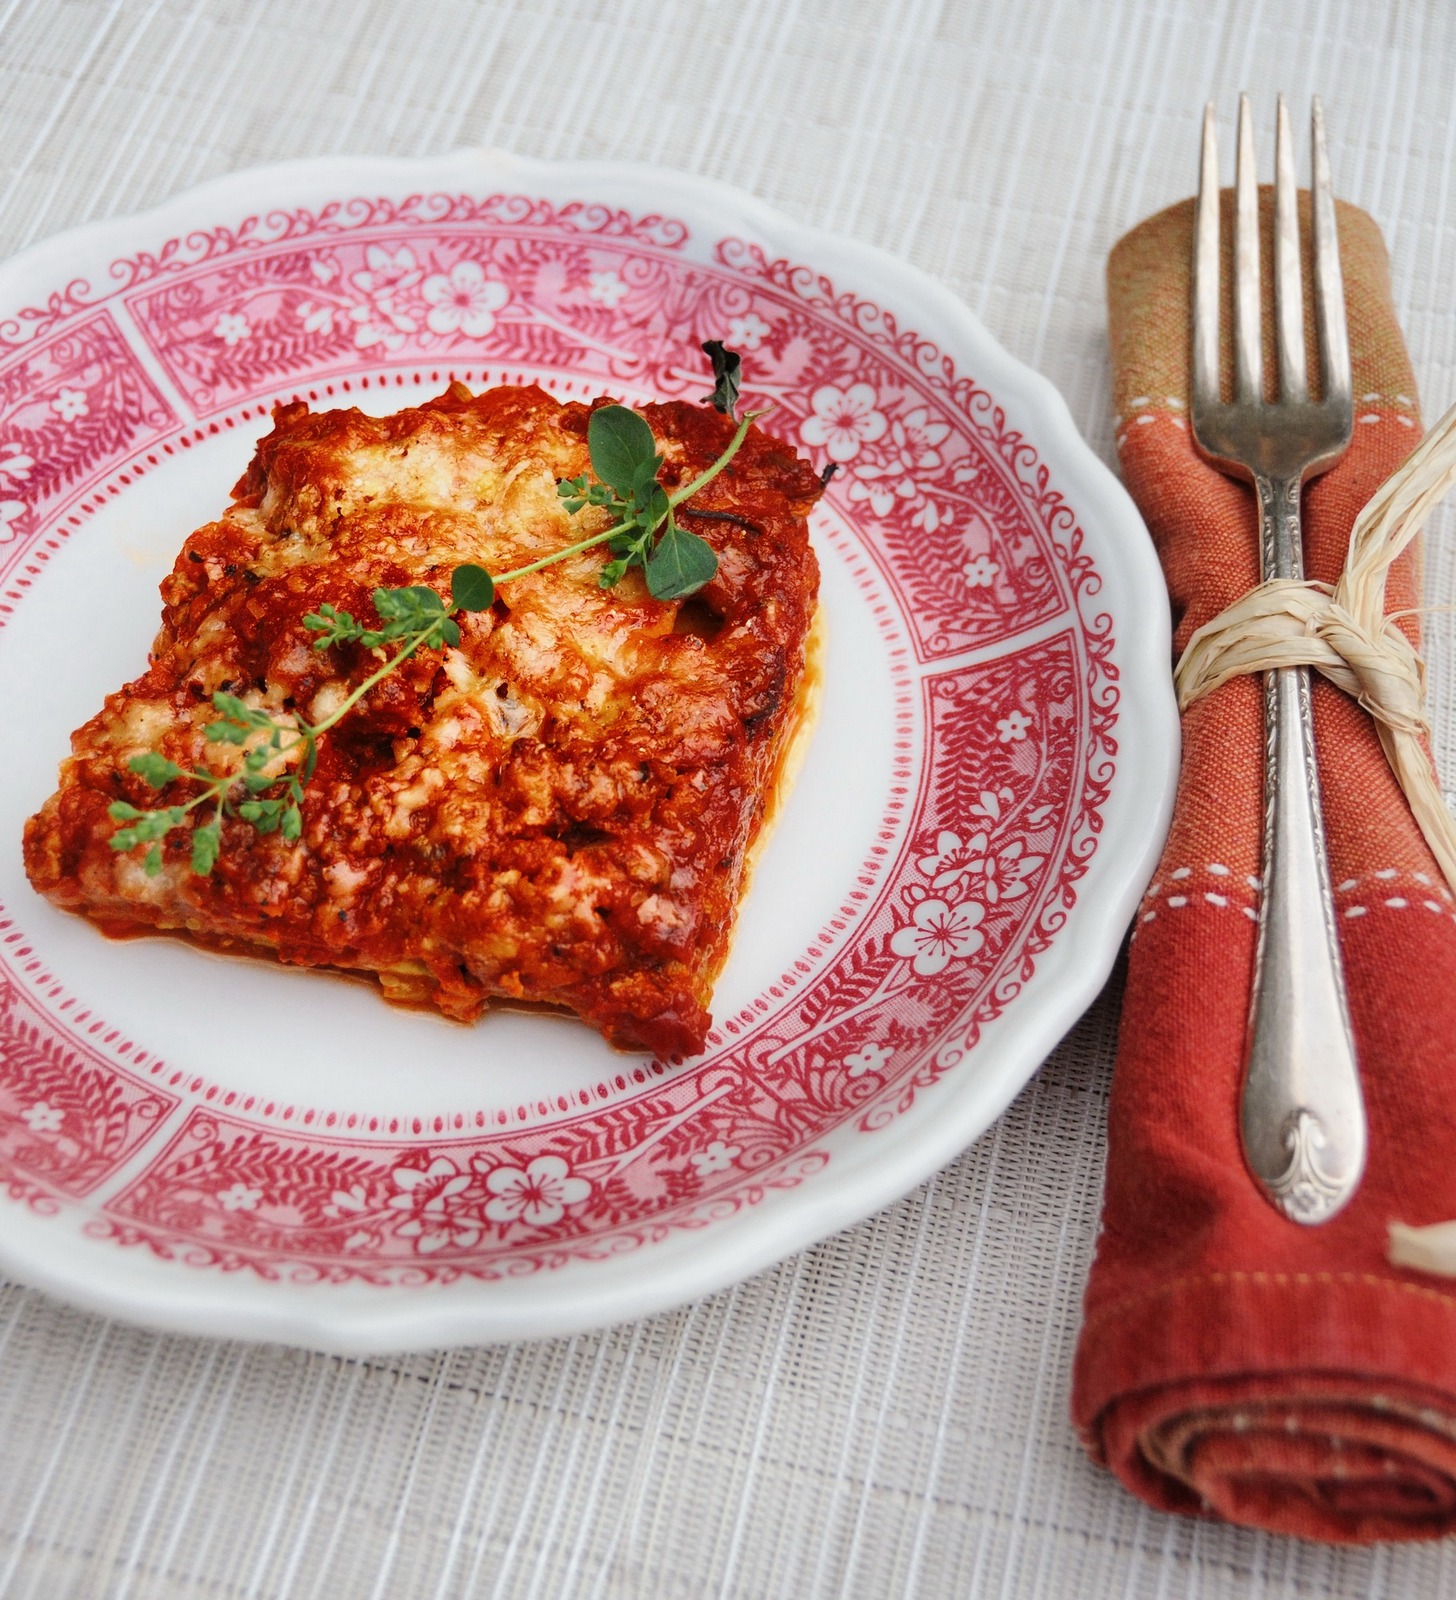 Zucchini "Lasagne", Red & Pink Patterned Plate